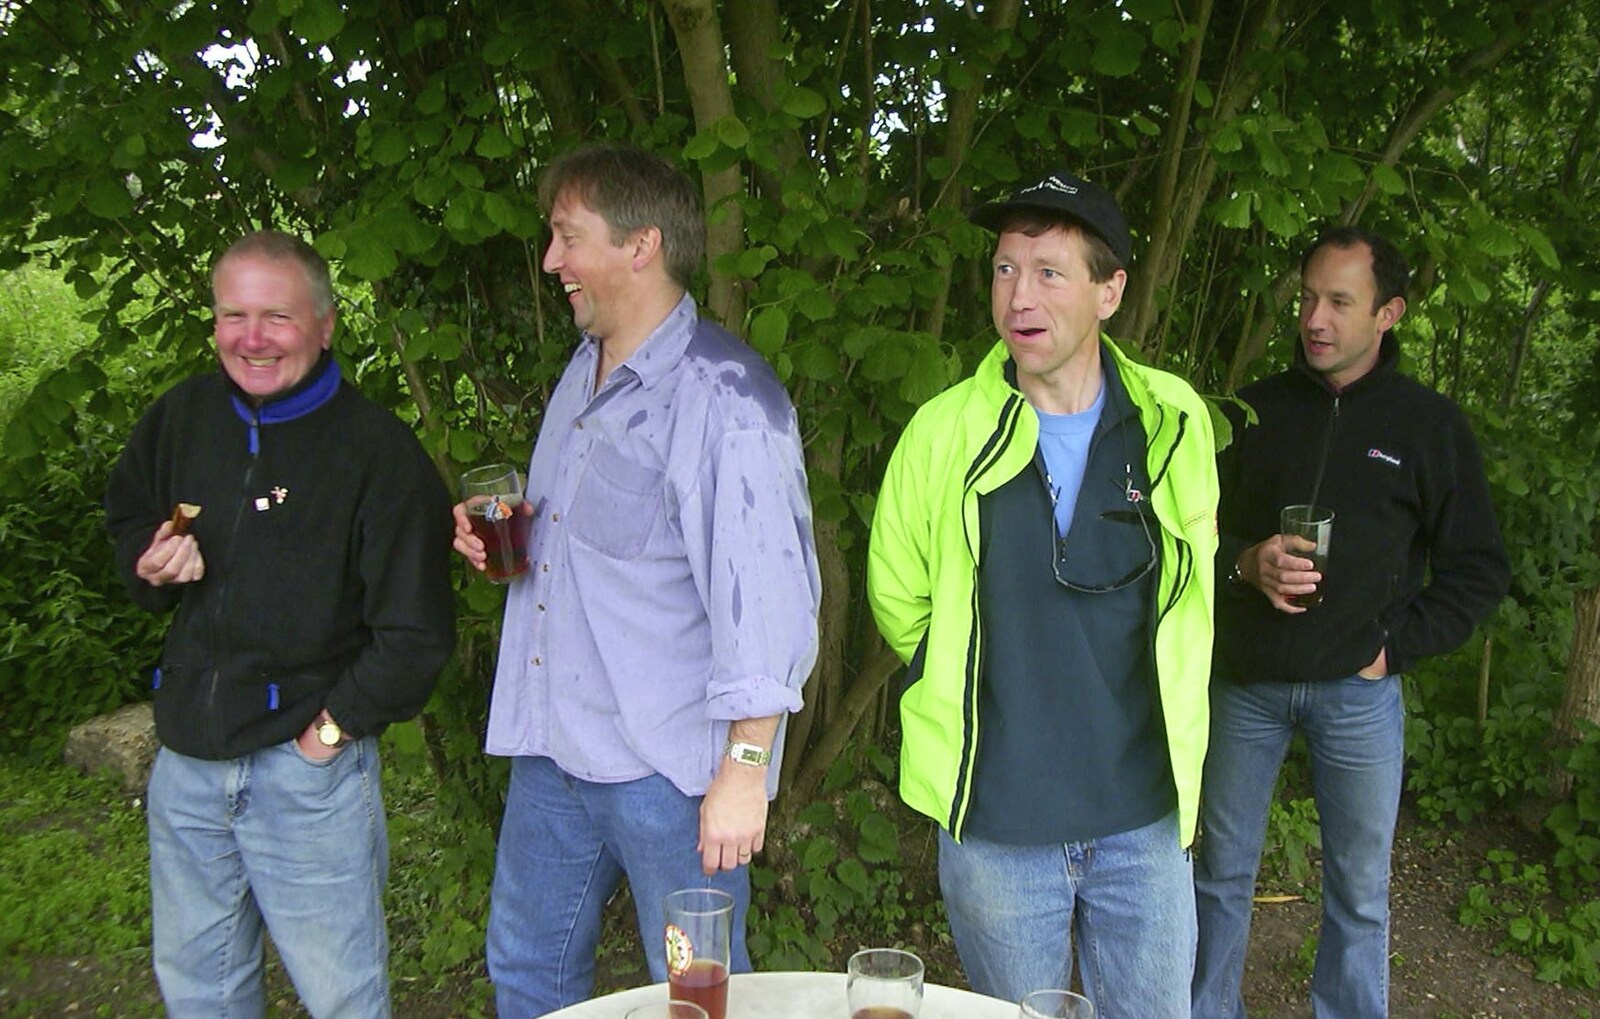 A Rainy Barbeque at the Swan Inn, Brome, Suffolk - 15th June 2002: John Willy, Nigel, Apple and DH